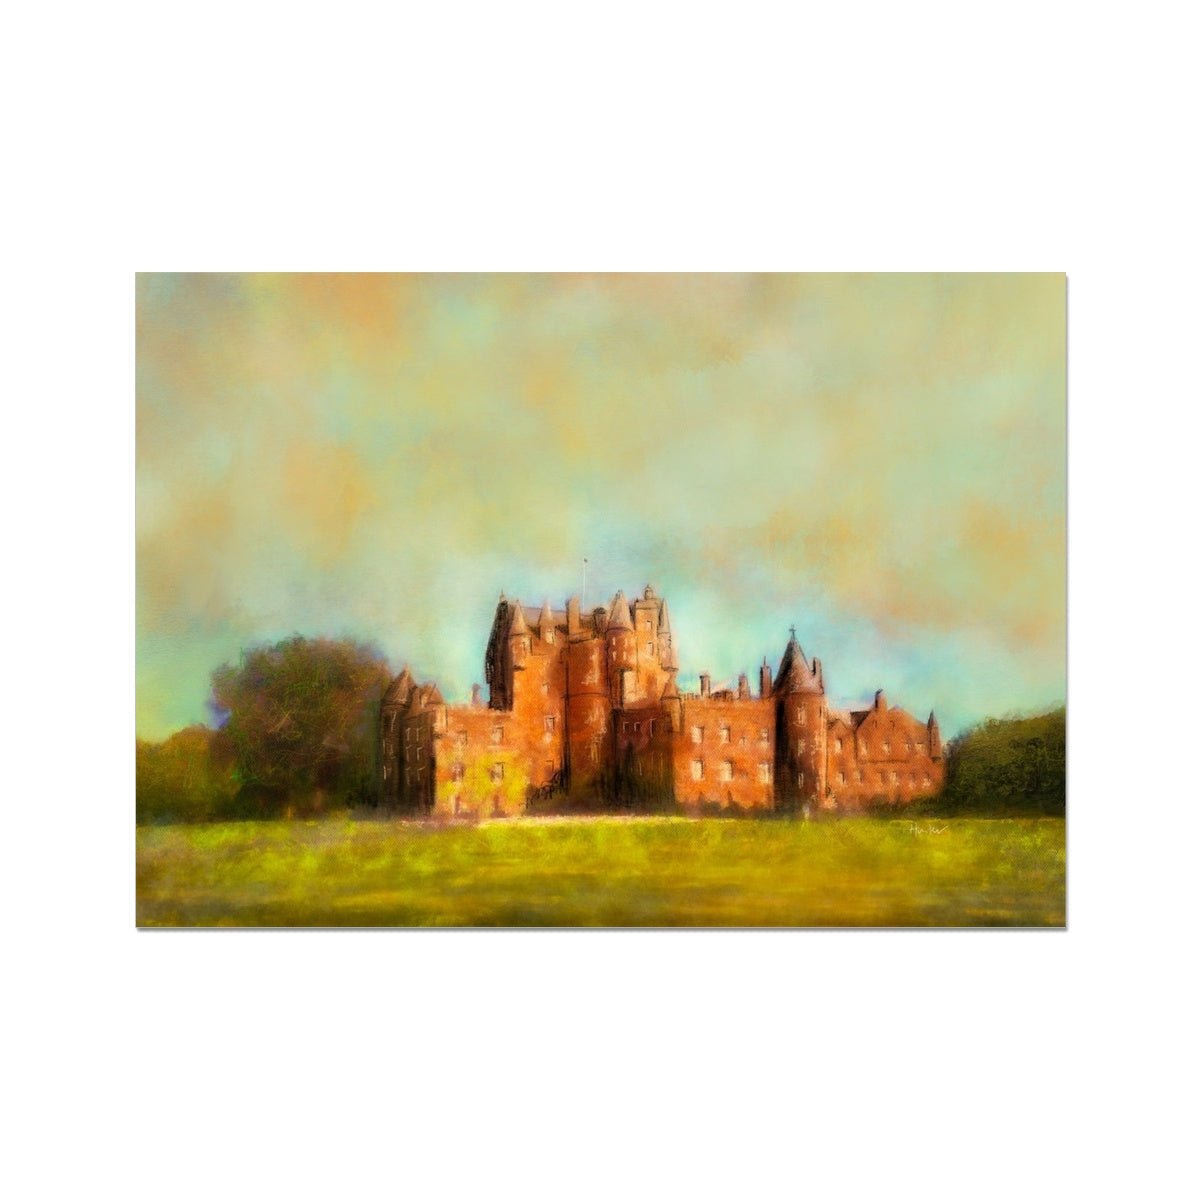 Glamis Castle Painting | Fine Art Prints From Scotland-Unframed Prints-Scottish Castles Art Gallery-A2 Landscape-Paintings, Prints, Homeware, Art Gifts From Scotland By Scottish Artist Kevin Hunter